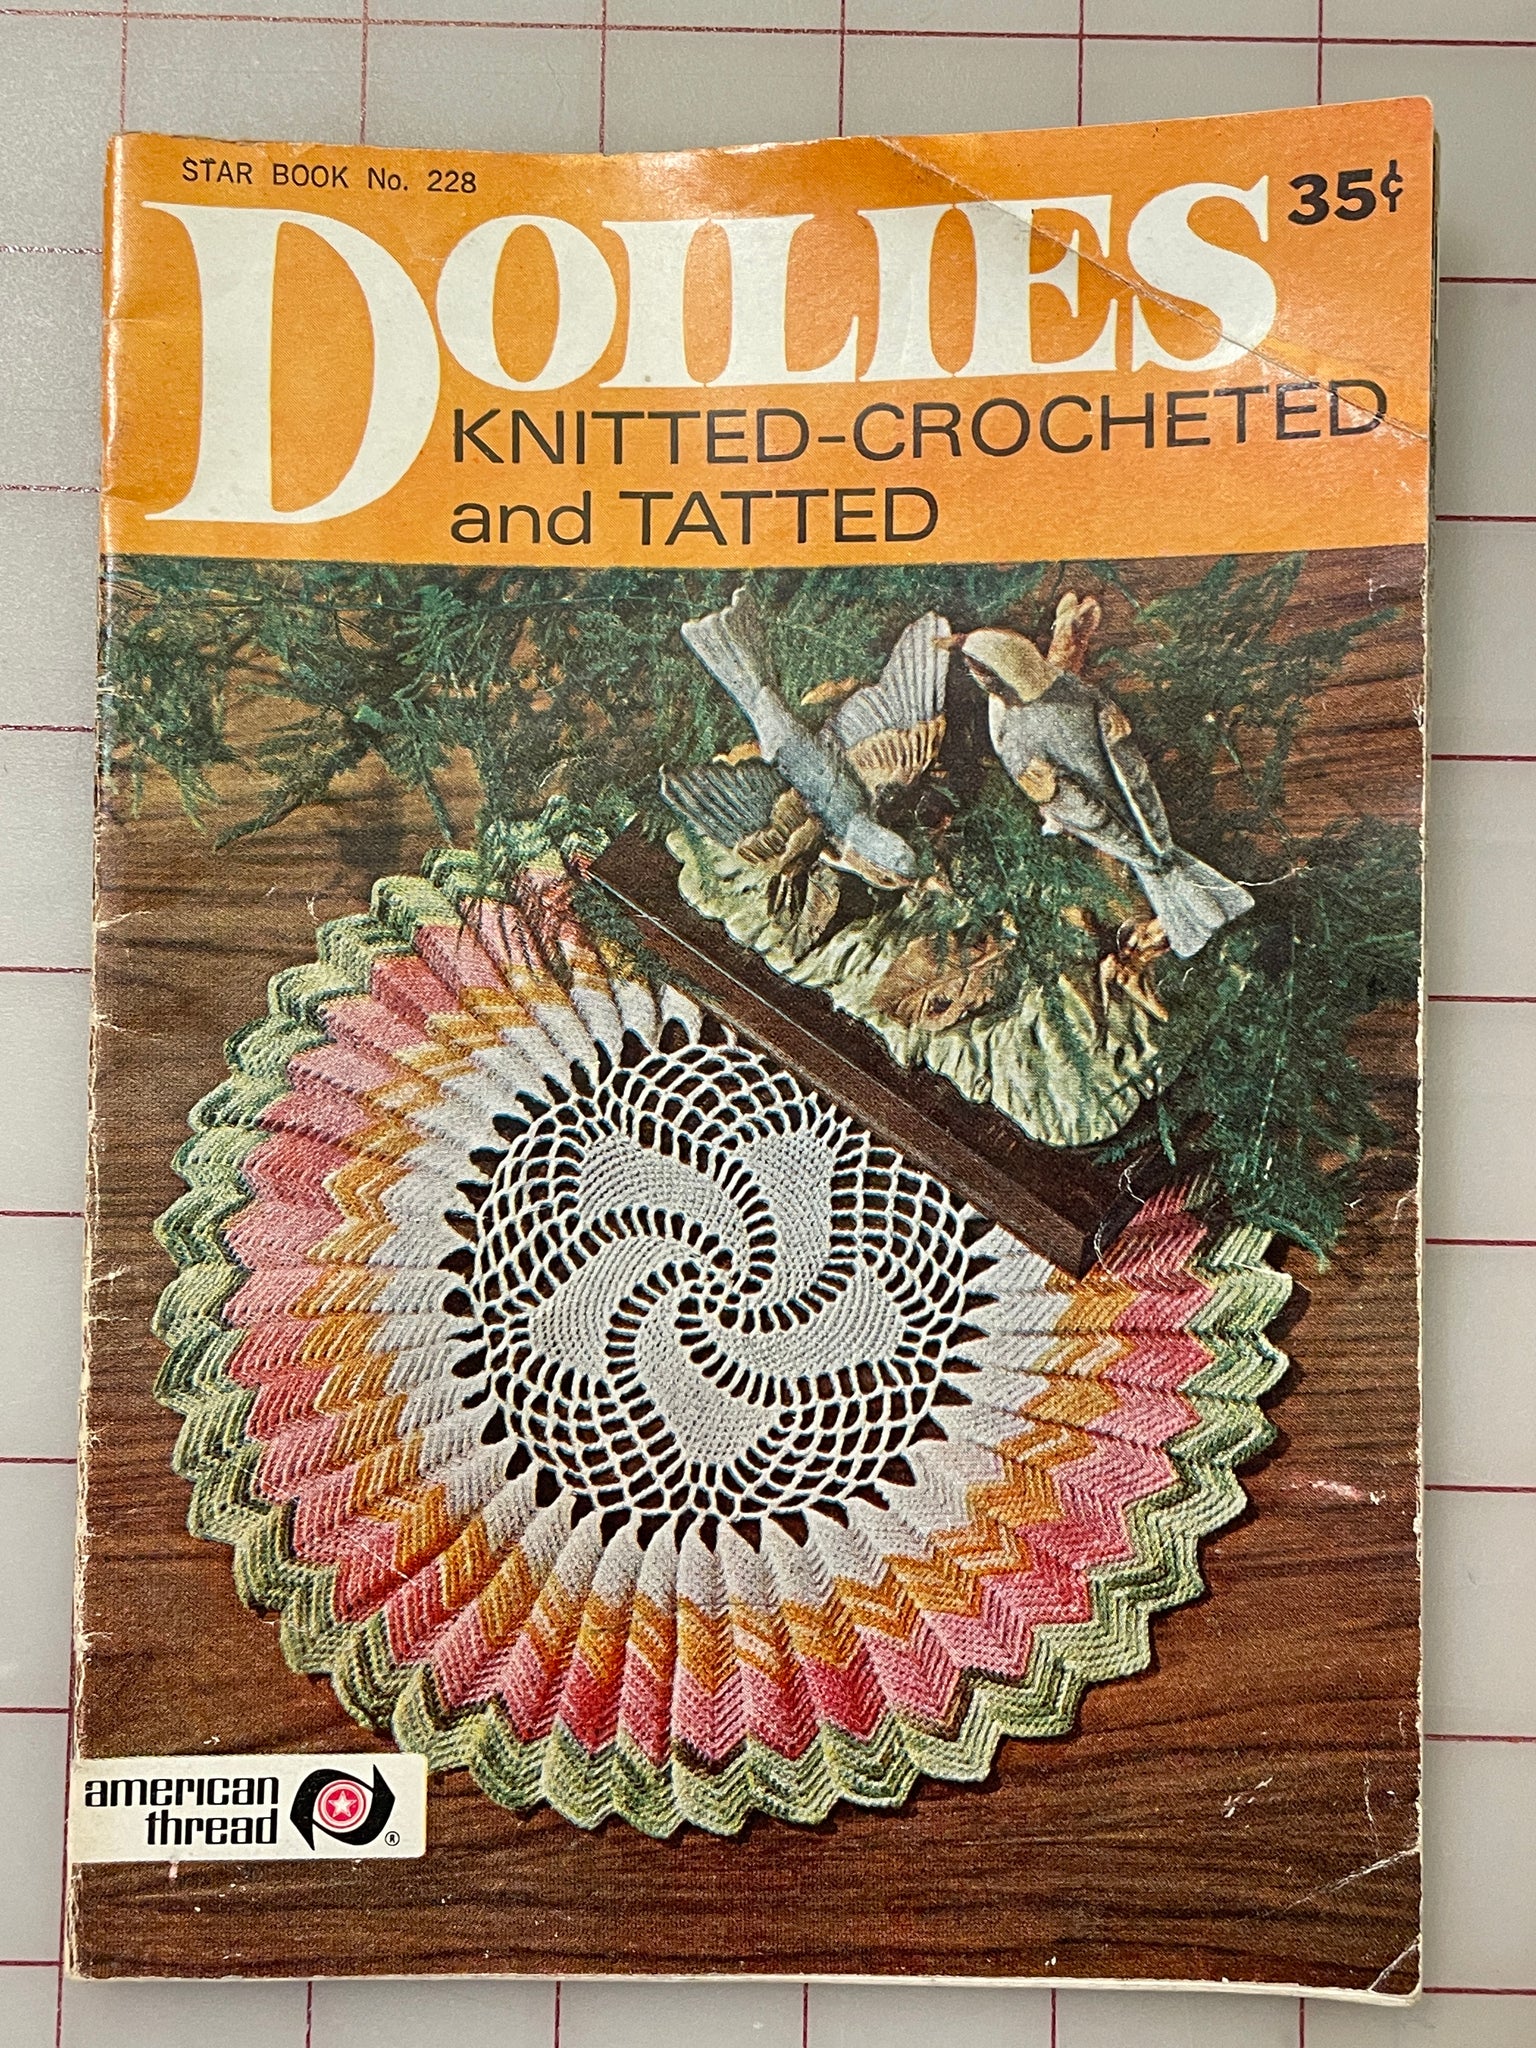 SALE Doilies Magazine Vintage - Knitted, Crocheted and Tatted